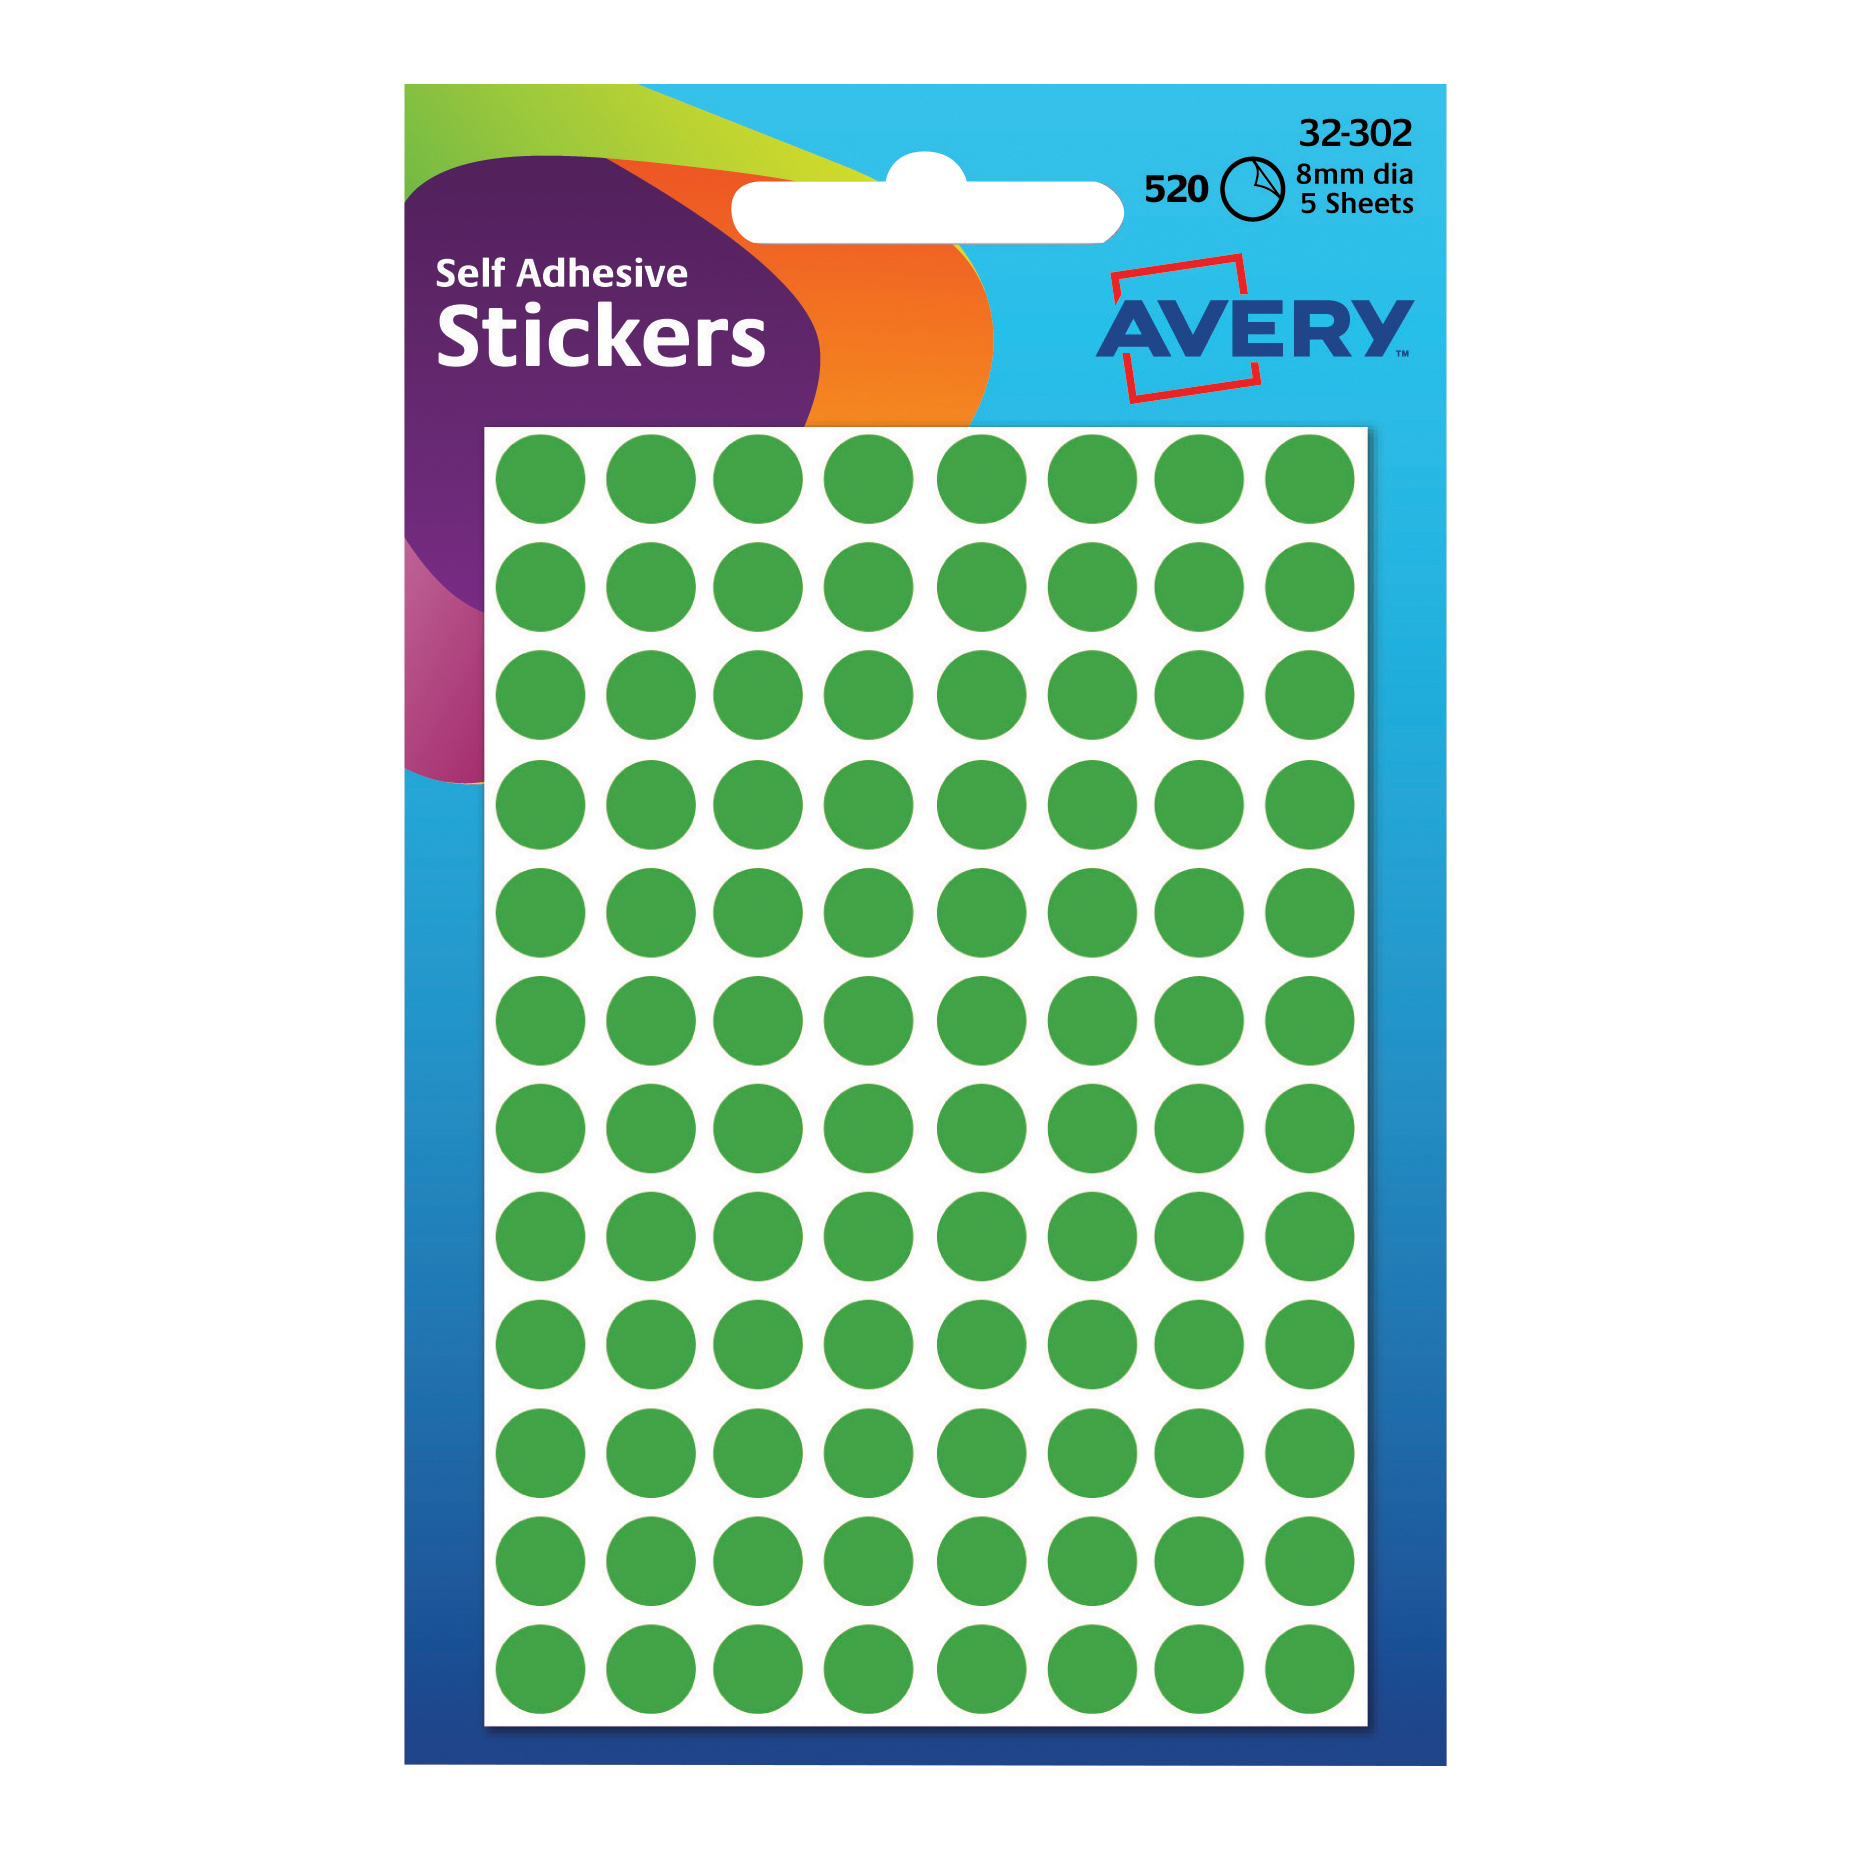 Stickers Circle Pack of 560 Purple 8mm Self Adhesive Round Labels 